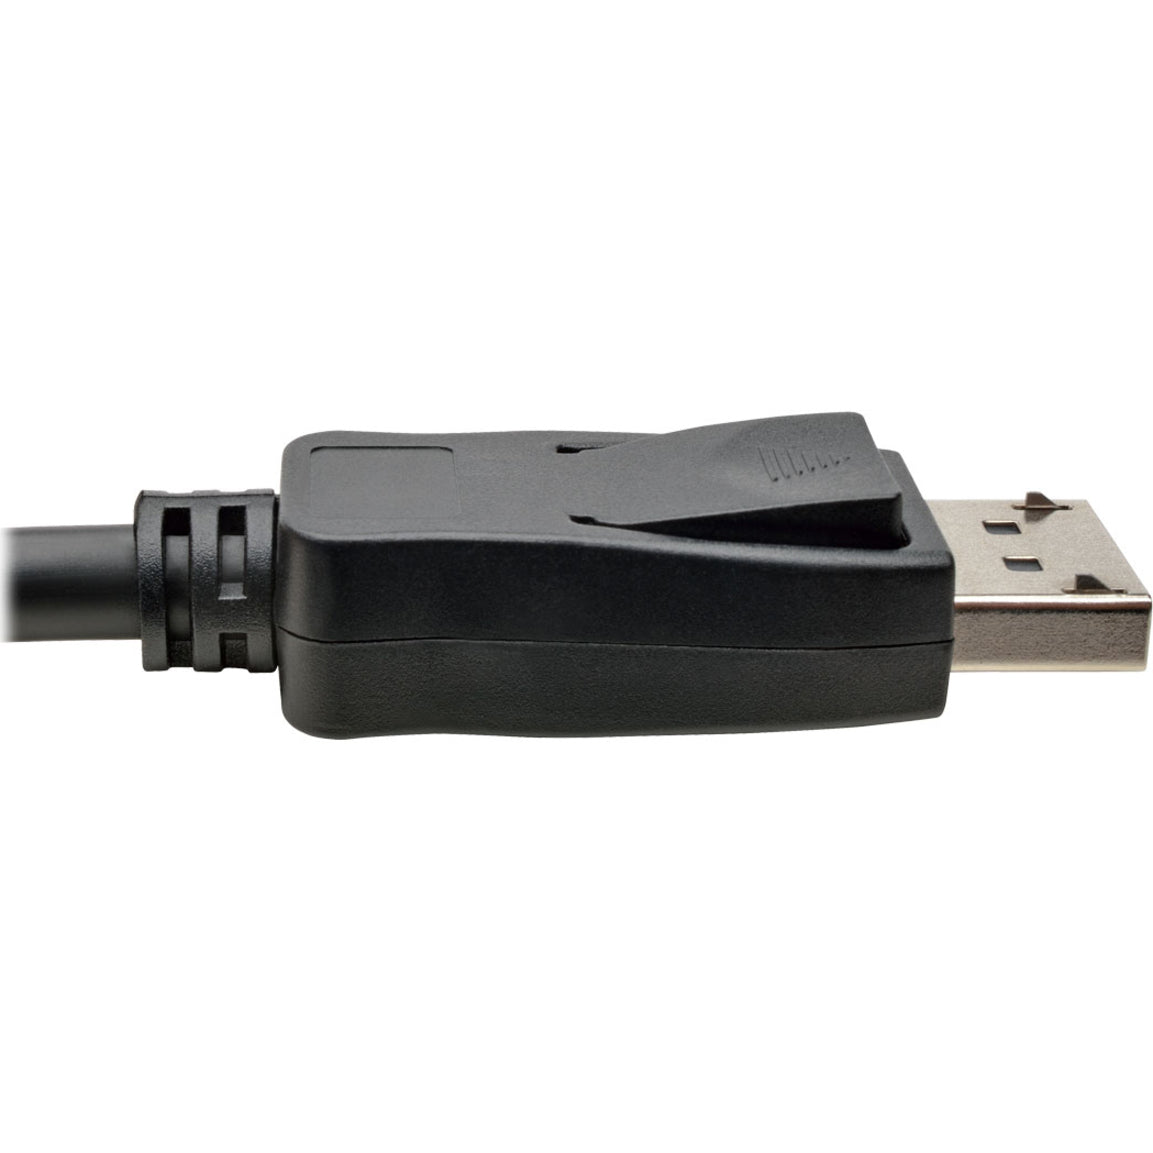 Tripp Lite P582-020-HD-V2A DisplayPort 1.2a to HDMI Active Adapter Cable (M/M), 20 ft.